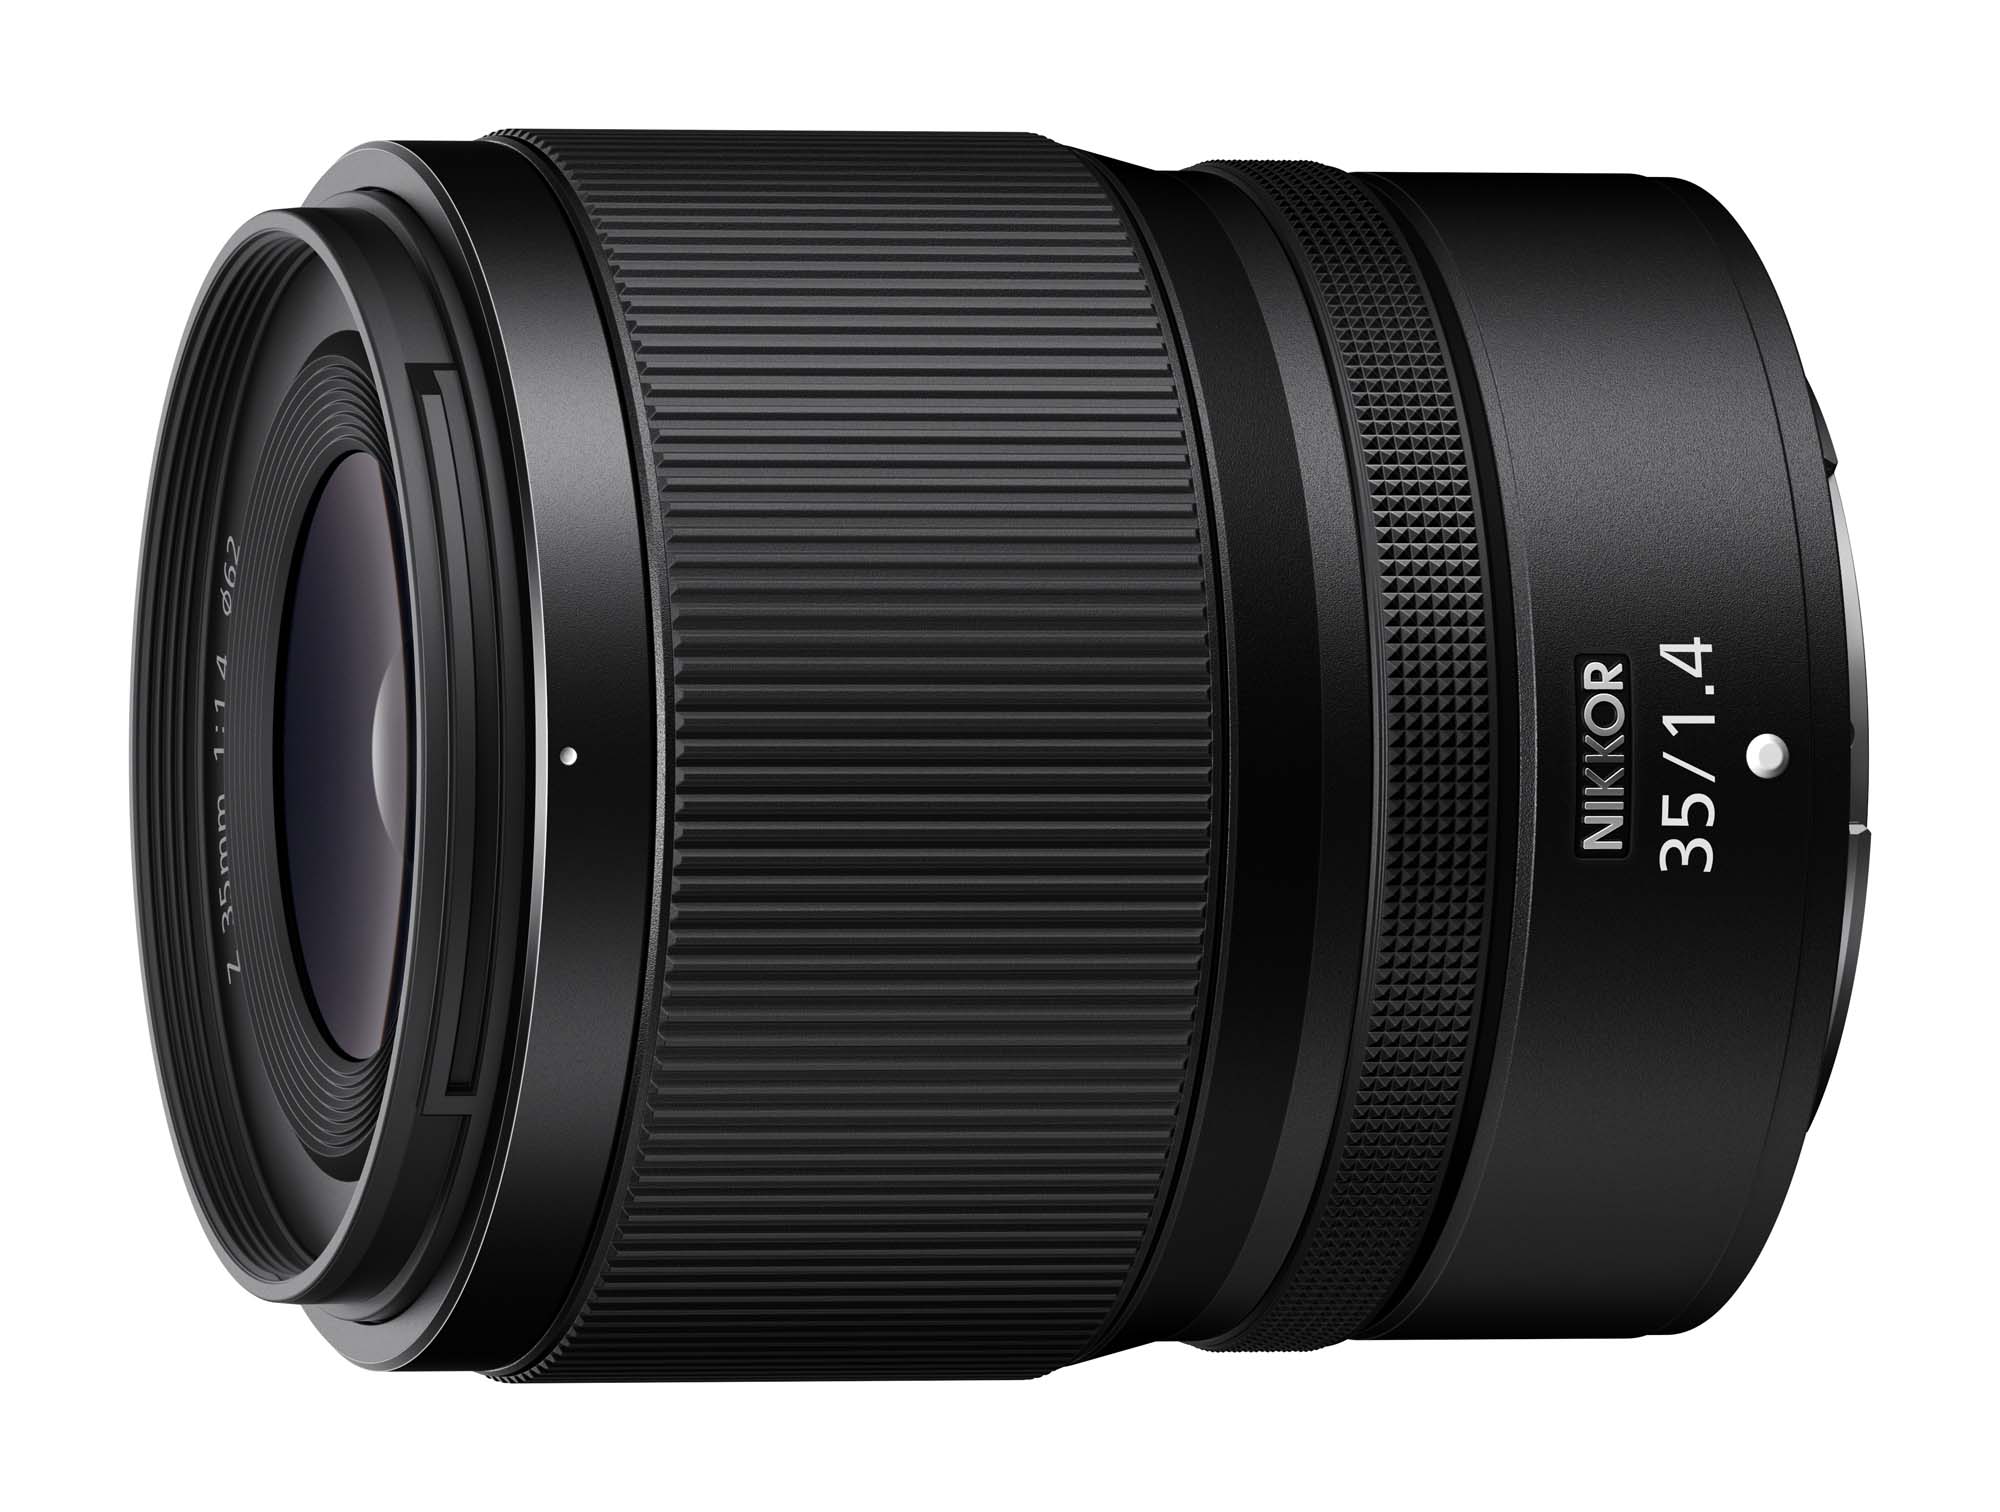 A Portable Wide-Angle Prime Lens with Stunning Bokeh